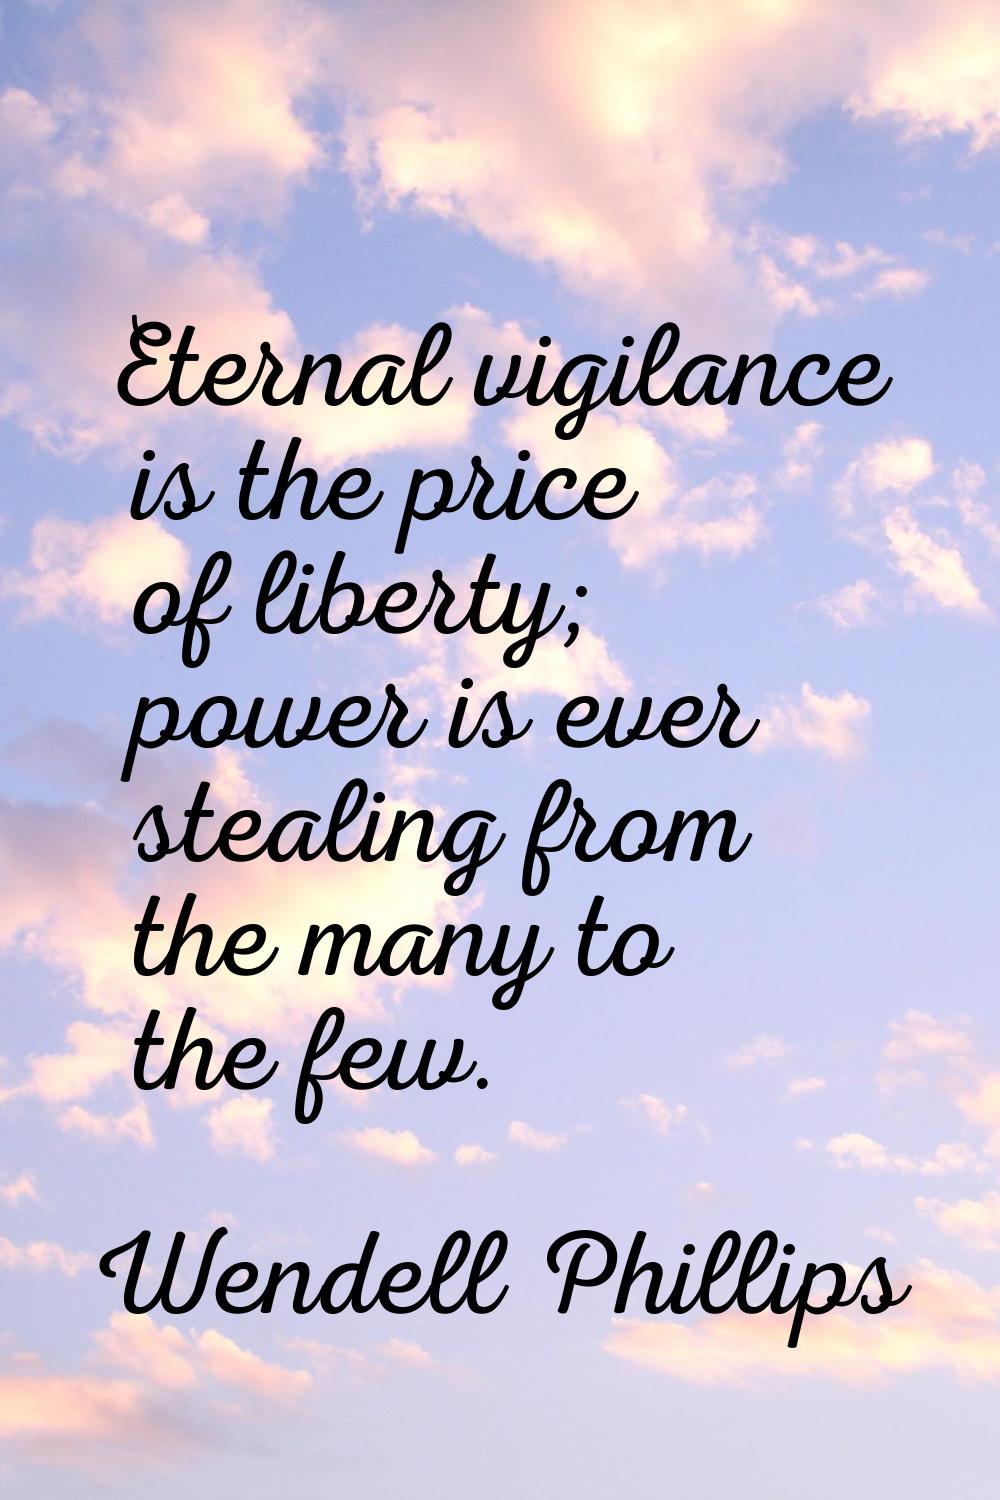 Eternal vigilance is the price of liberty; power is ever stealing from the many to the few.